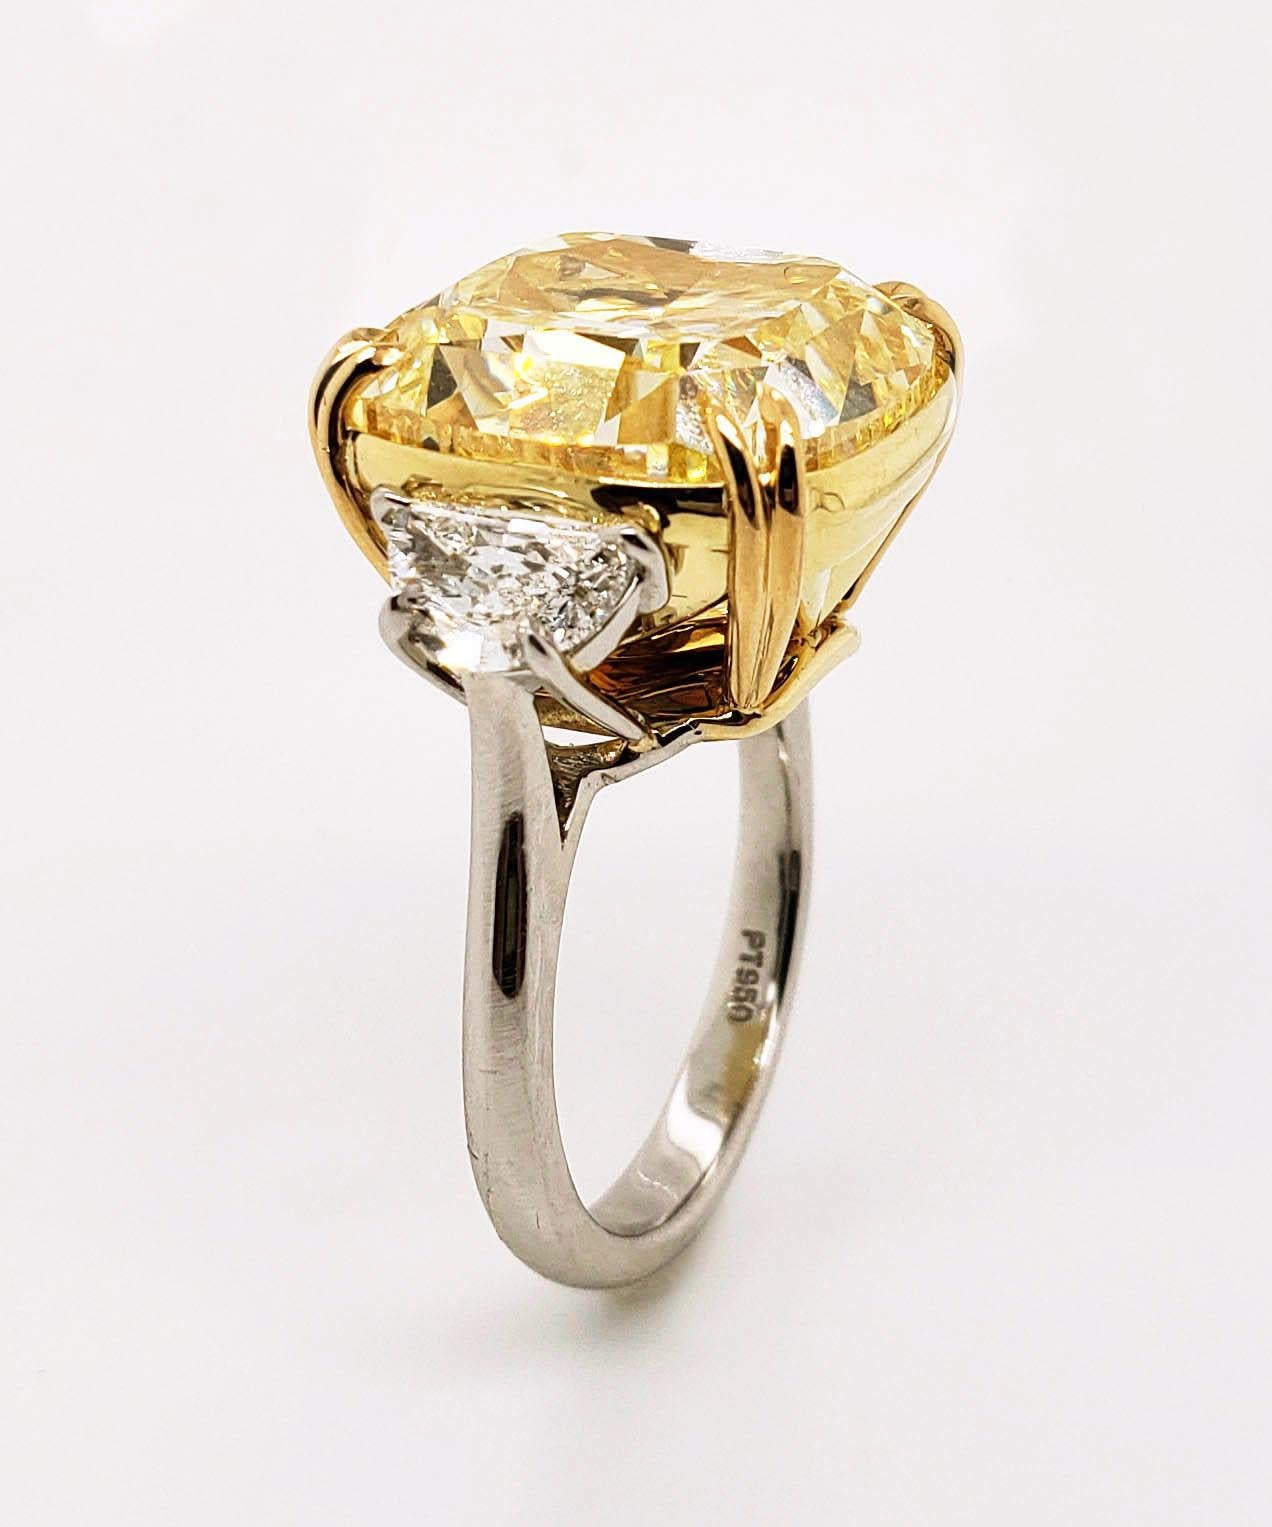 From SCARSELLI, this important 20 caratS Fancy Yellow Cushion Cut Diamond (see certificate picture for detailed stone information) flanked by a pair of half-moon white diamonds totaling 1.02ct set in handmade platinum and 18k gold mounting. This